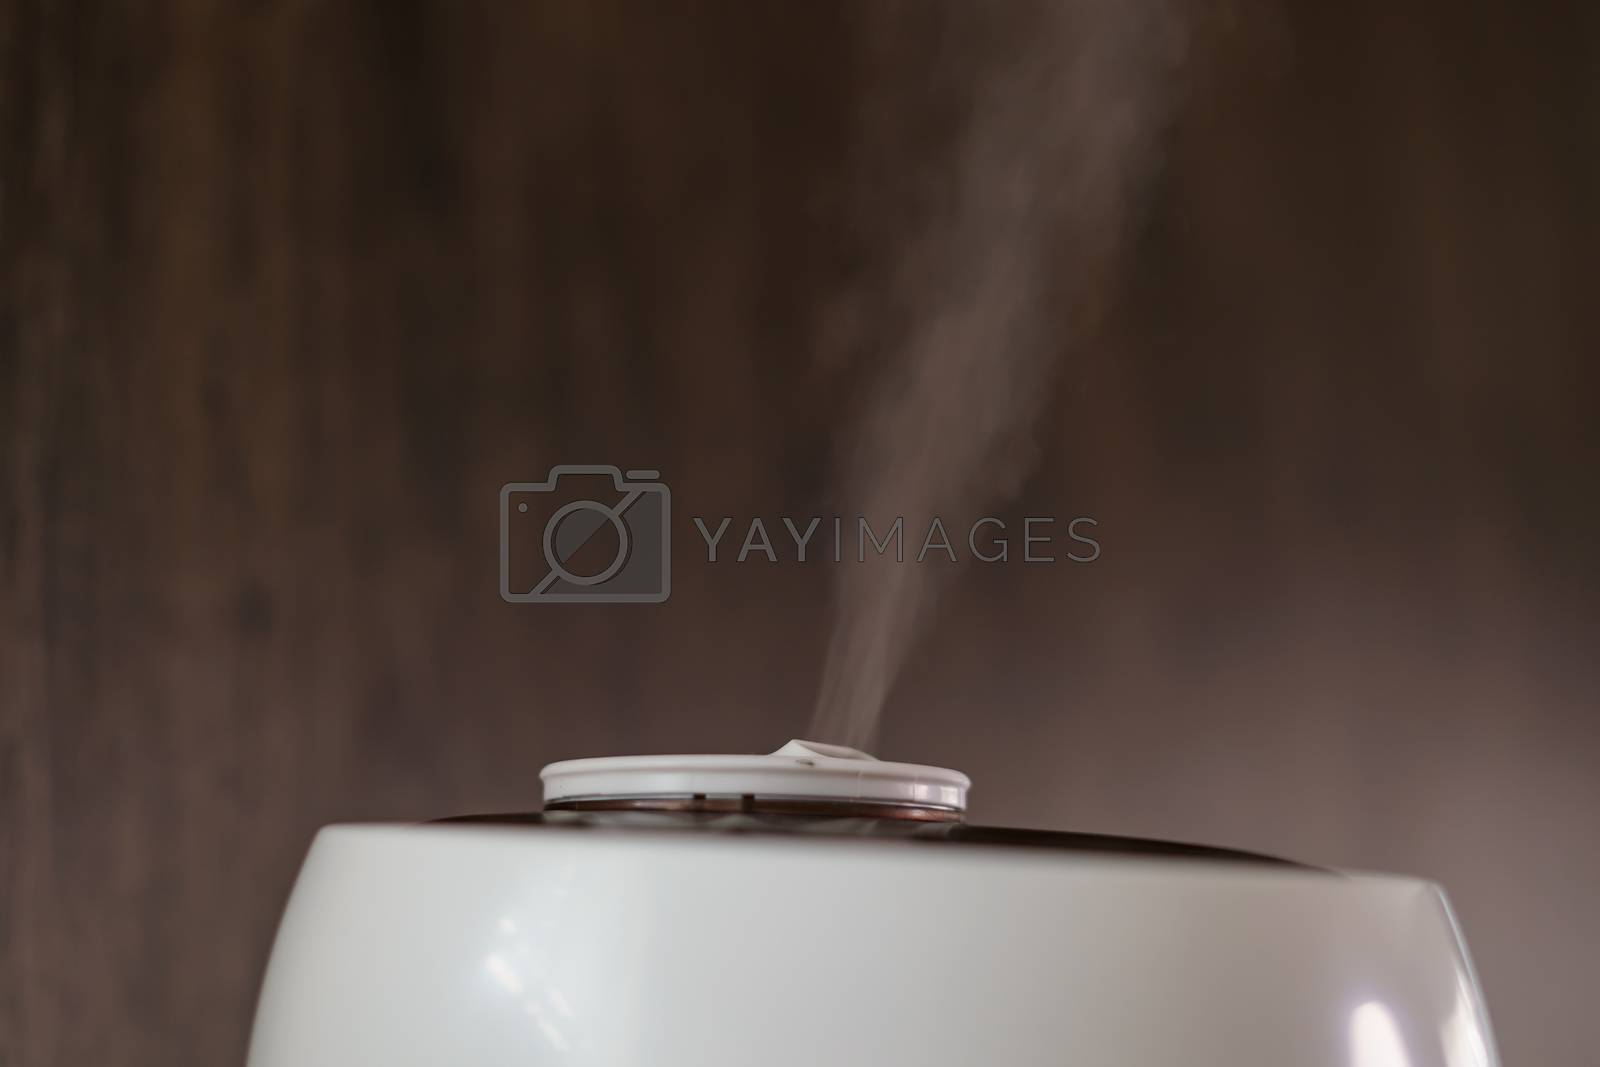 Royalty free image of Aroma oil vapour from humidifier or diffuser moisture in the hou by sirawit99